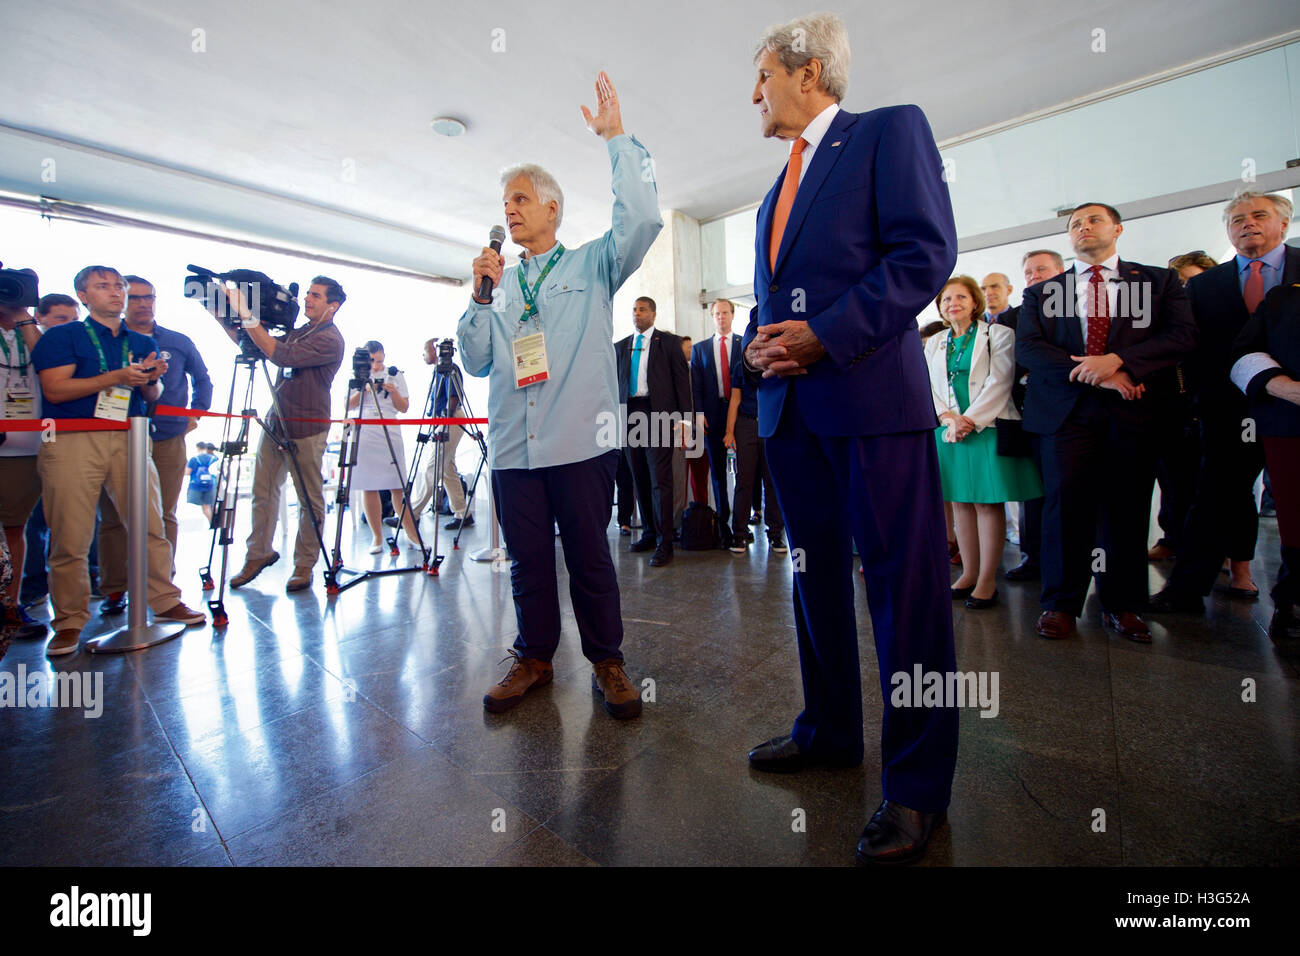 Olympic gold medalist Mark Spitz addresses members of Team USA as he and his fellow U.S. Presidential Delegation members - including U.S. Secretary of State John Kerry - visit the Brazilian Naval Academy in Rio de Janiero, Brazil, on August 5, 2016, to meet U.S. athletes training at the facility. Stock Photo